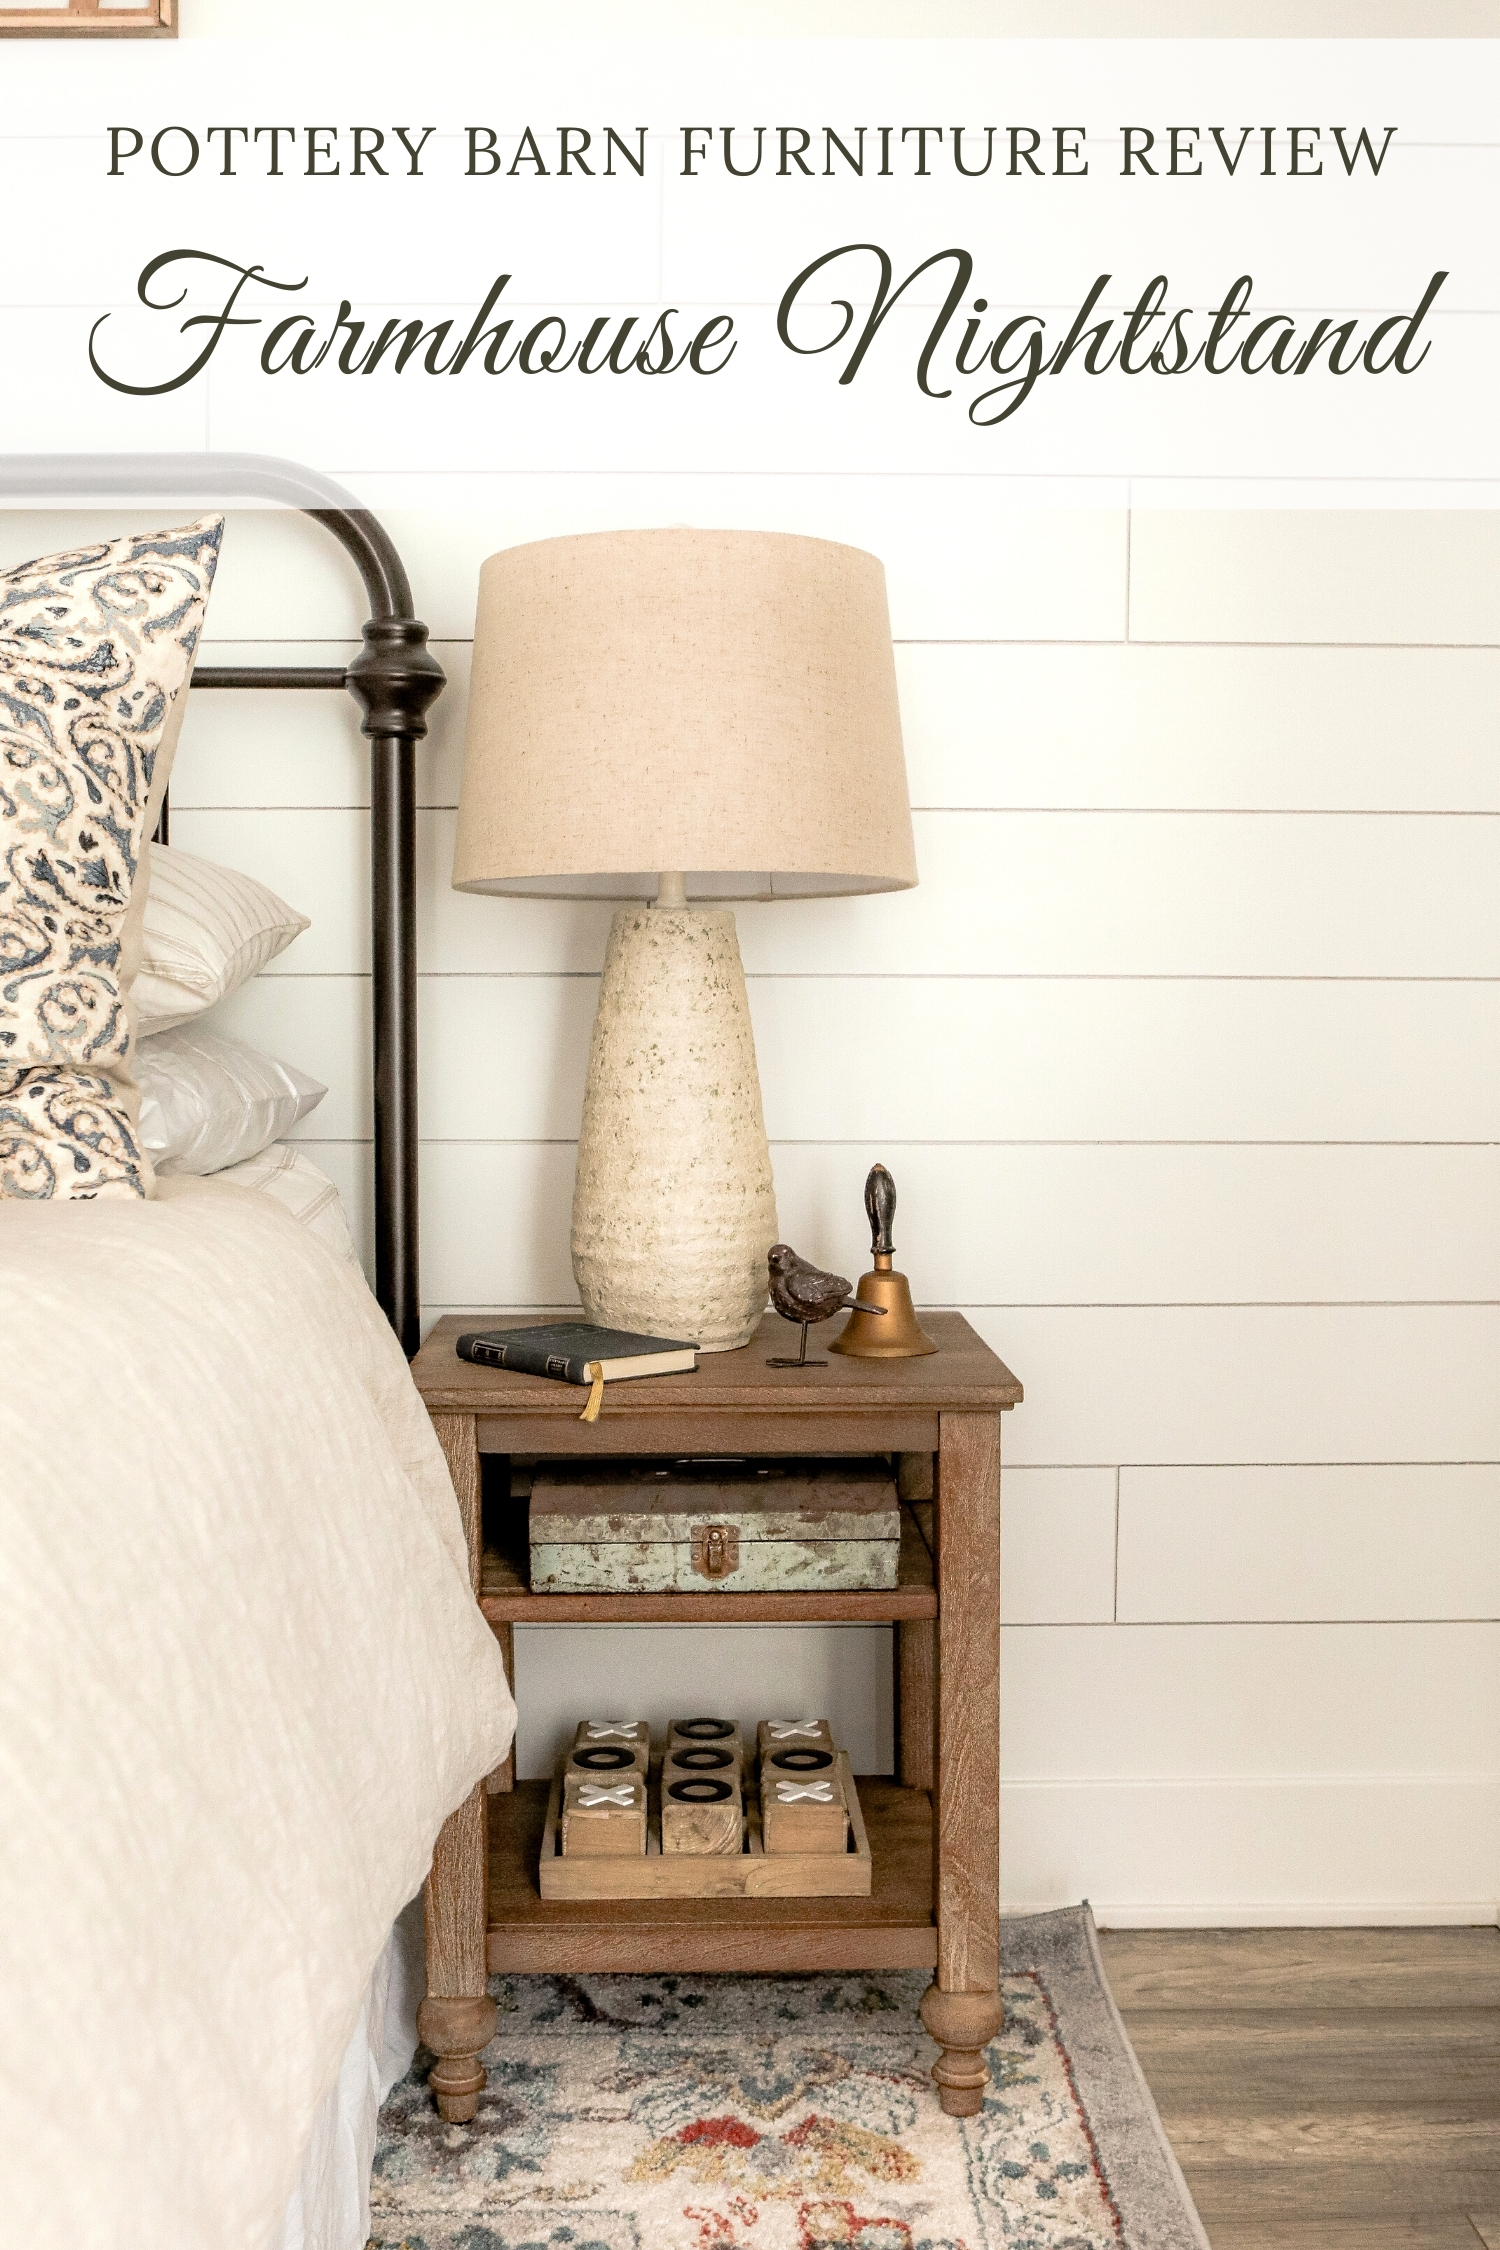 Farmhouse Nightstand Pottery barn furniture Review